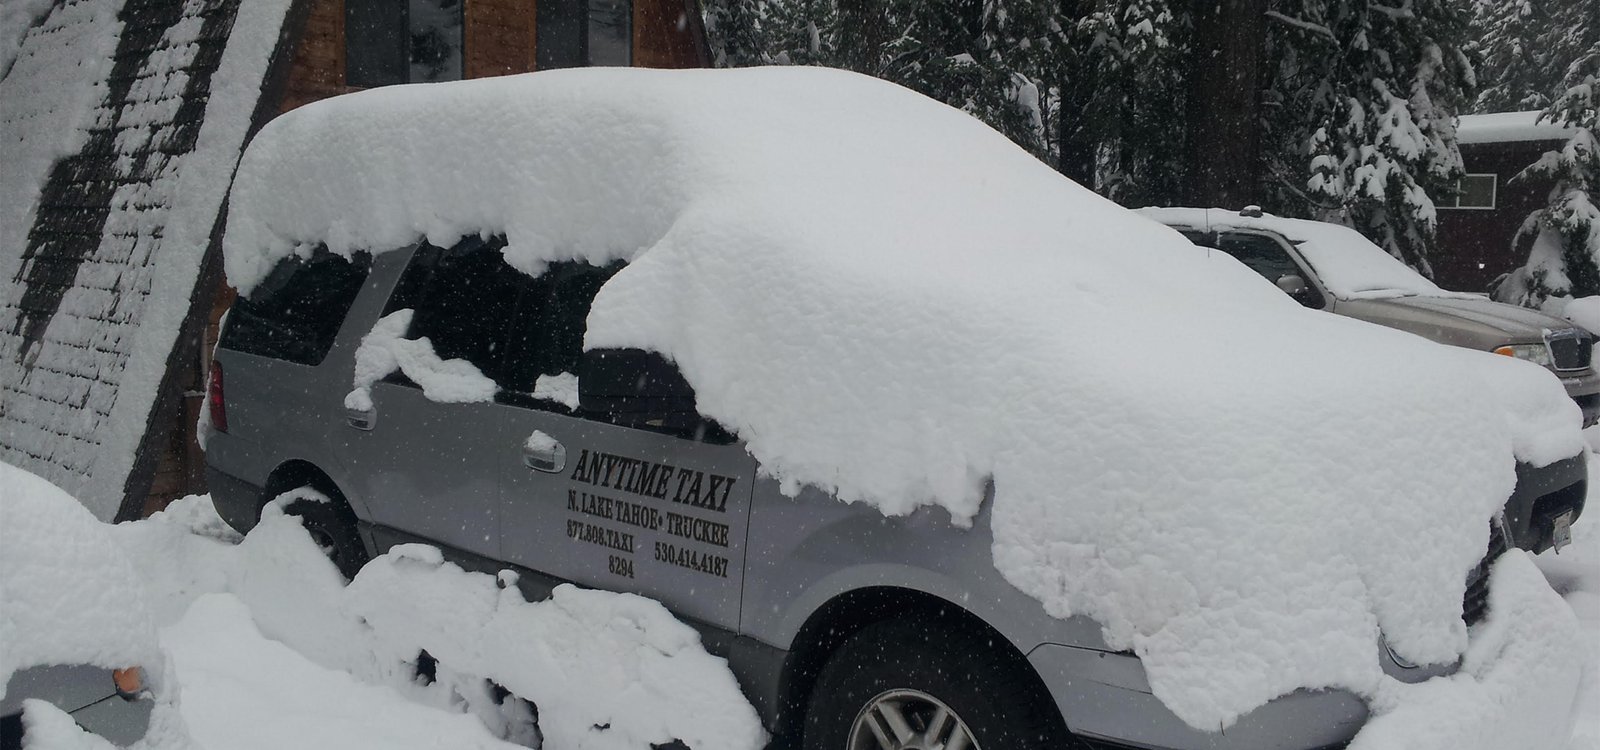 anytime taxi north tahoe taxi service